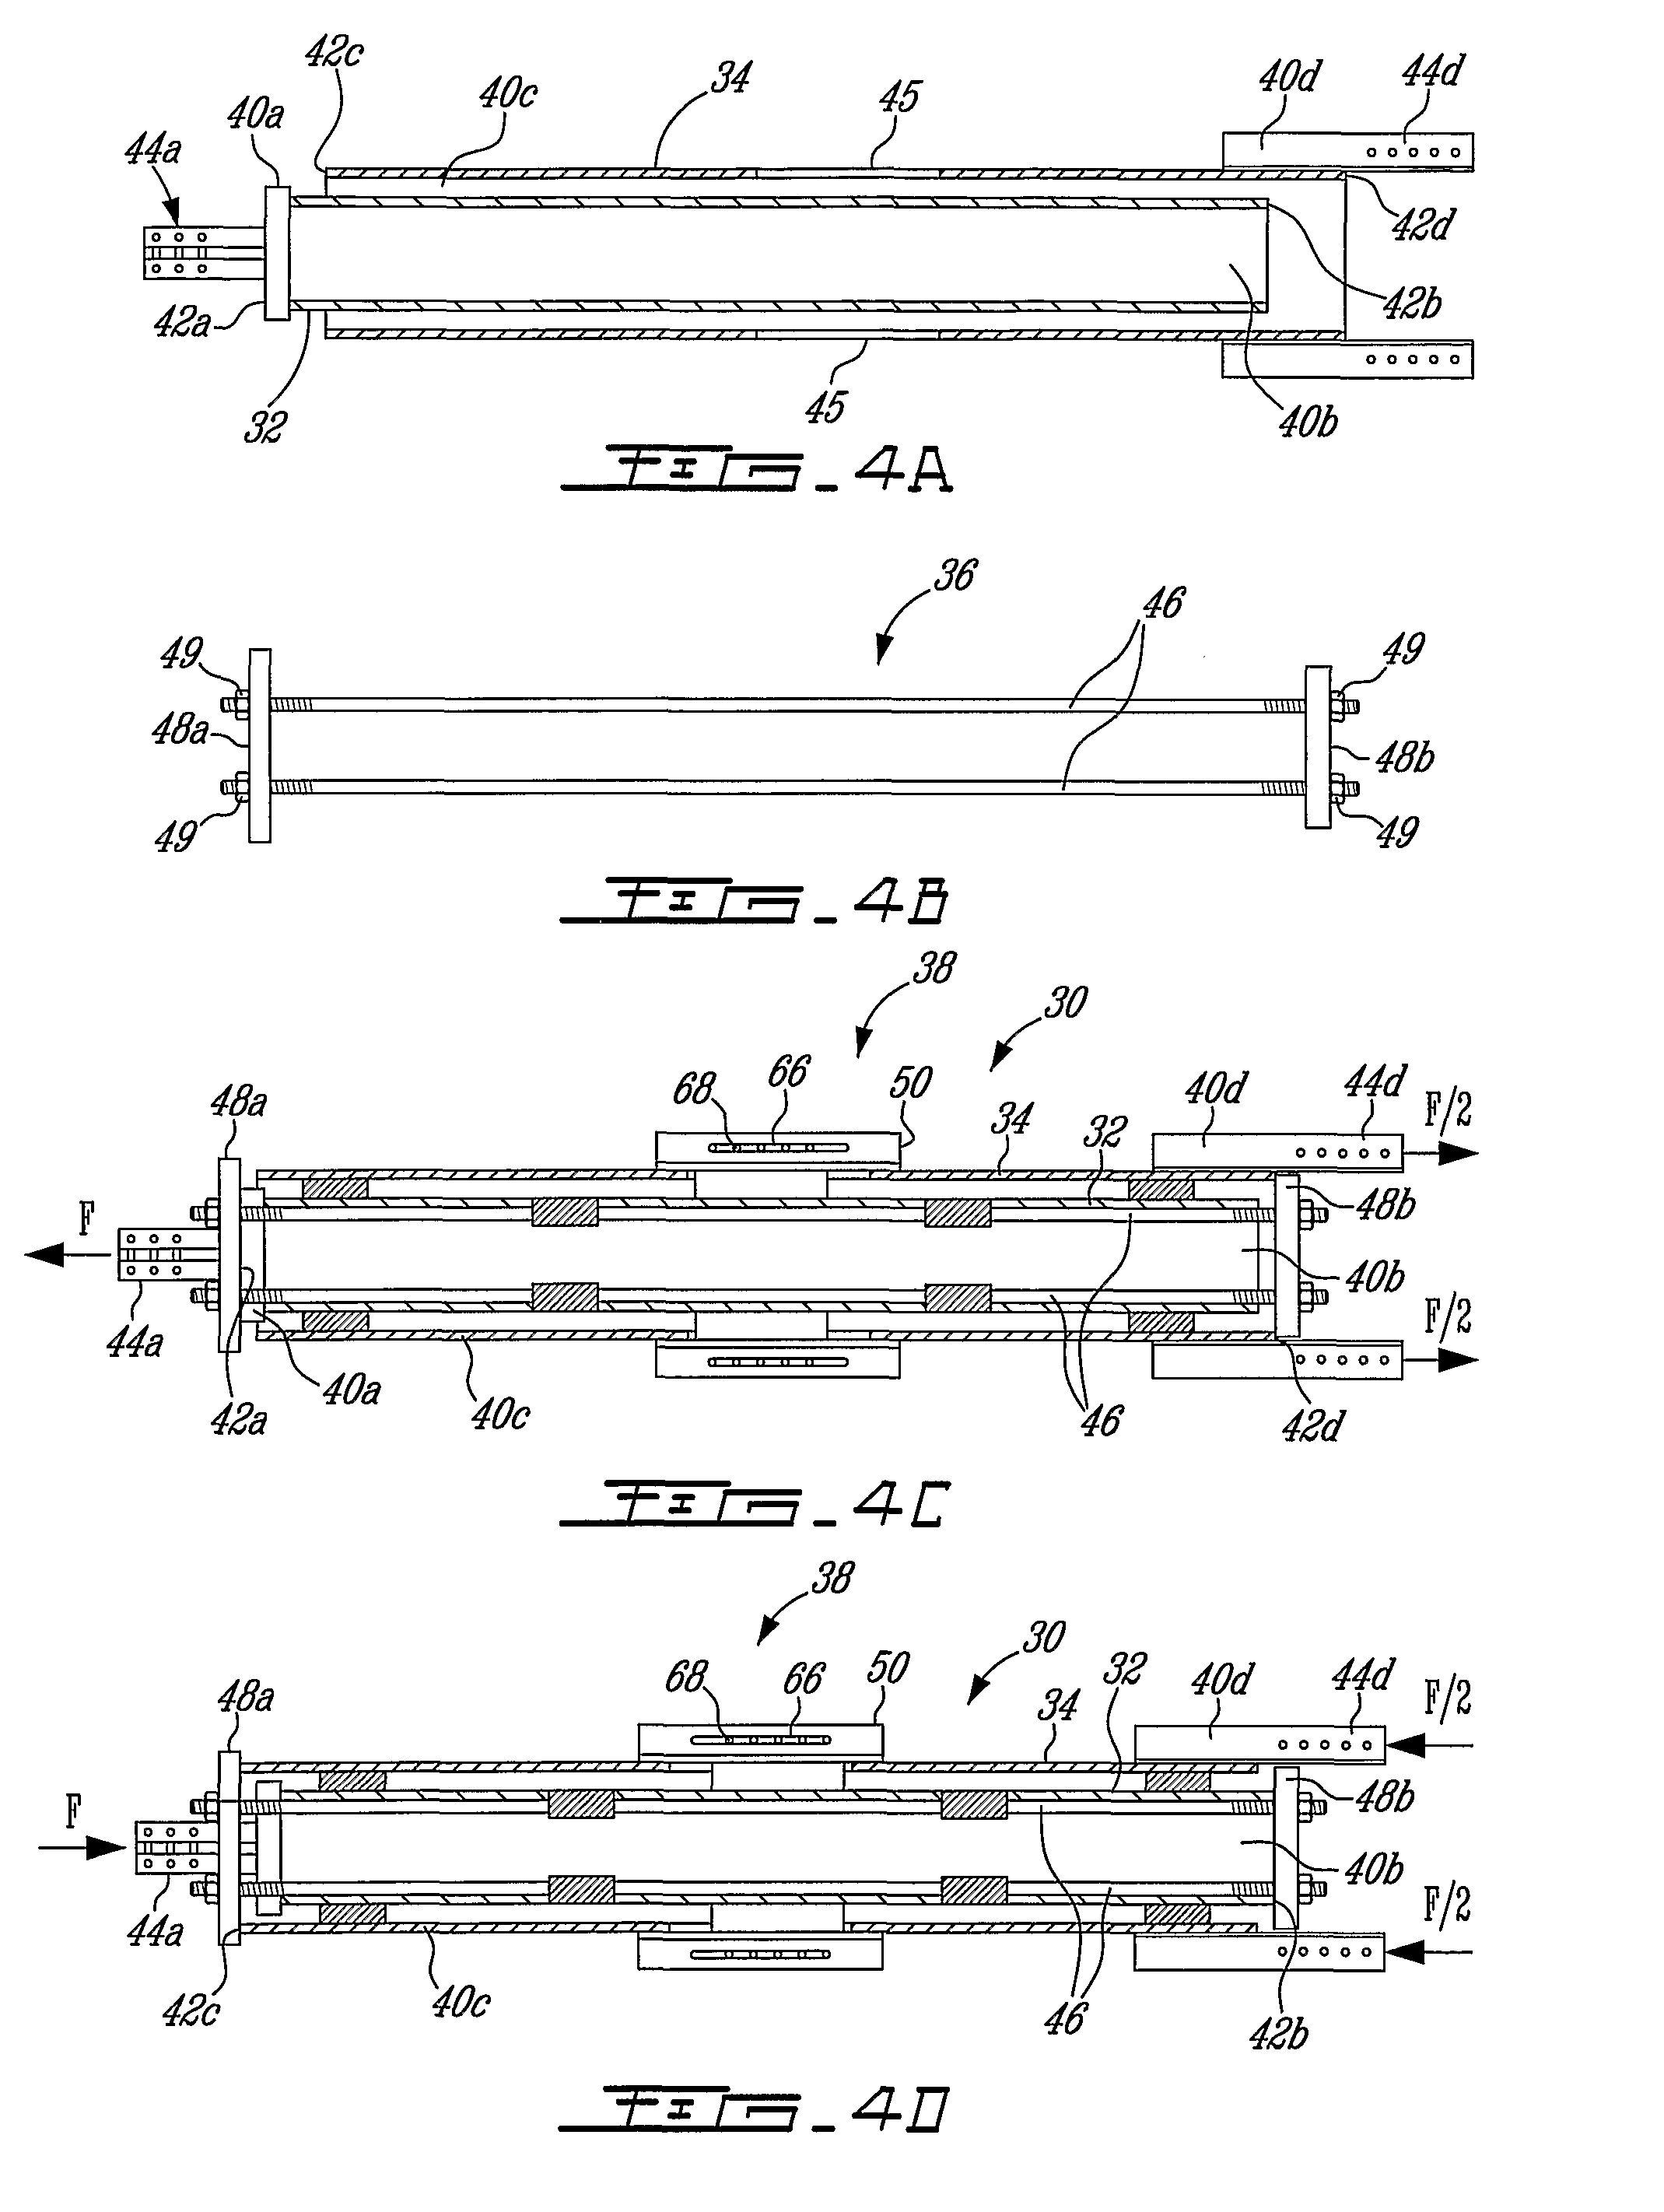 Self-centering energy dissipative brace apparatus with tensioning elements